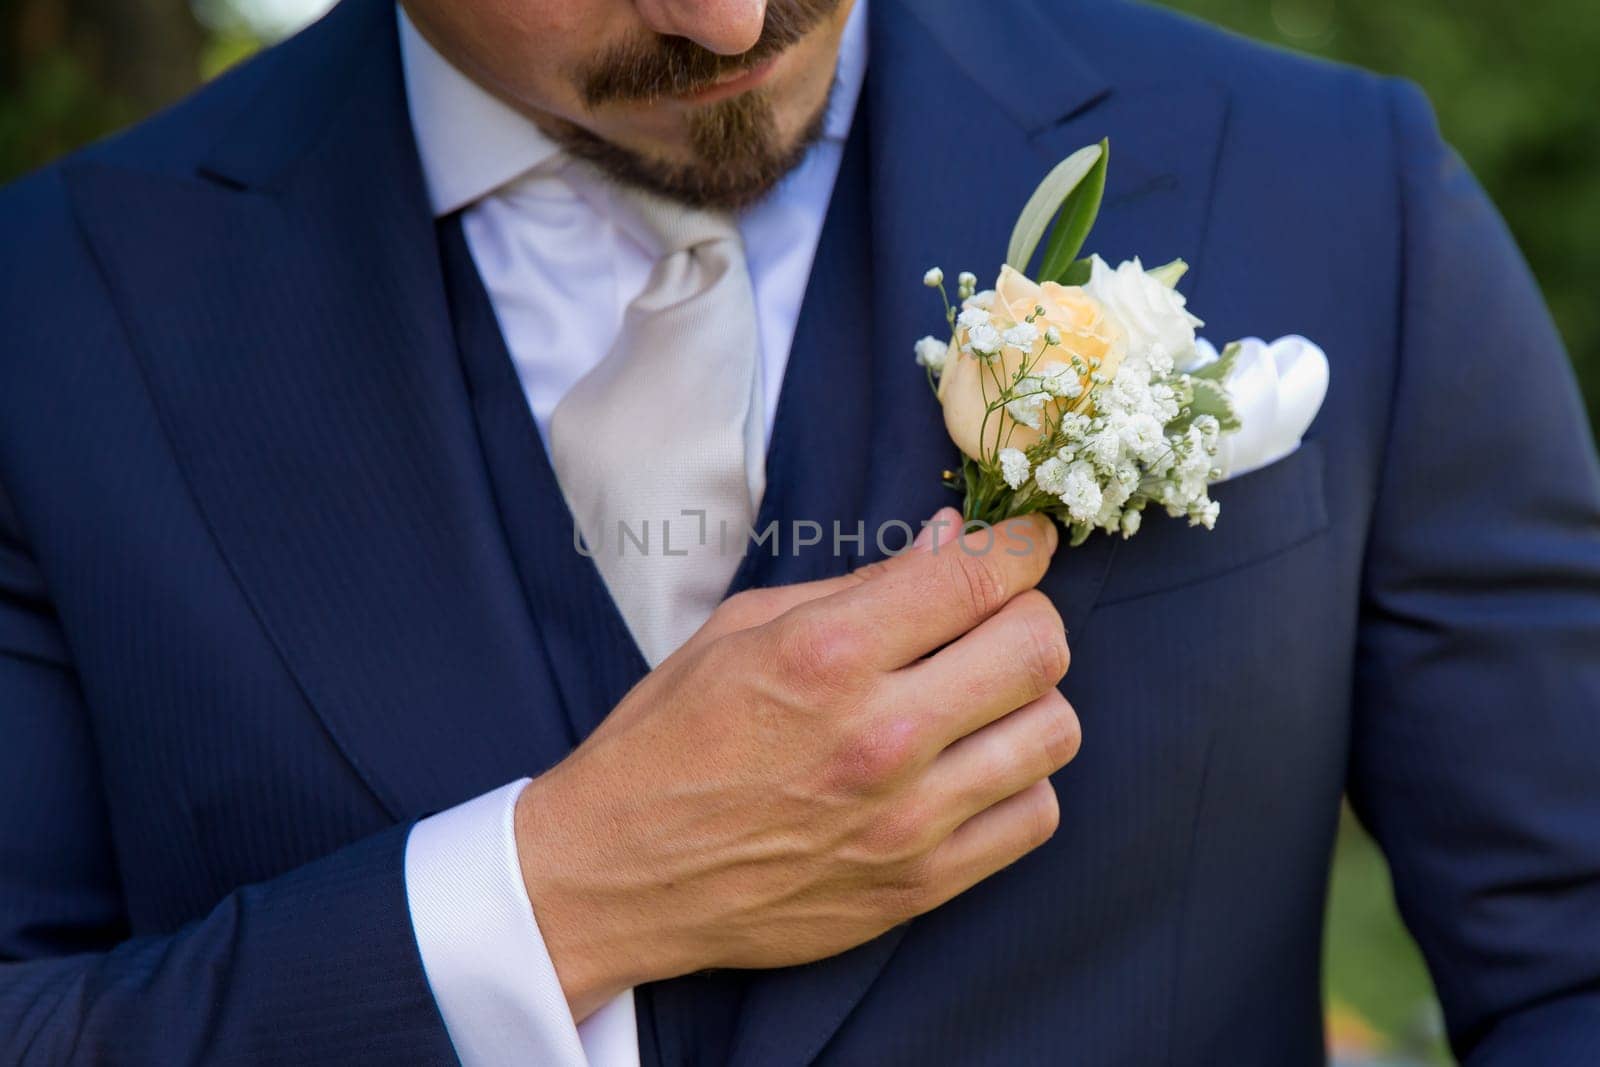 Elegant wedding boutonniere on the groom's suit. Soft focus. No face. by leonik